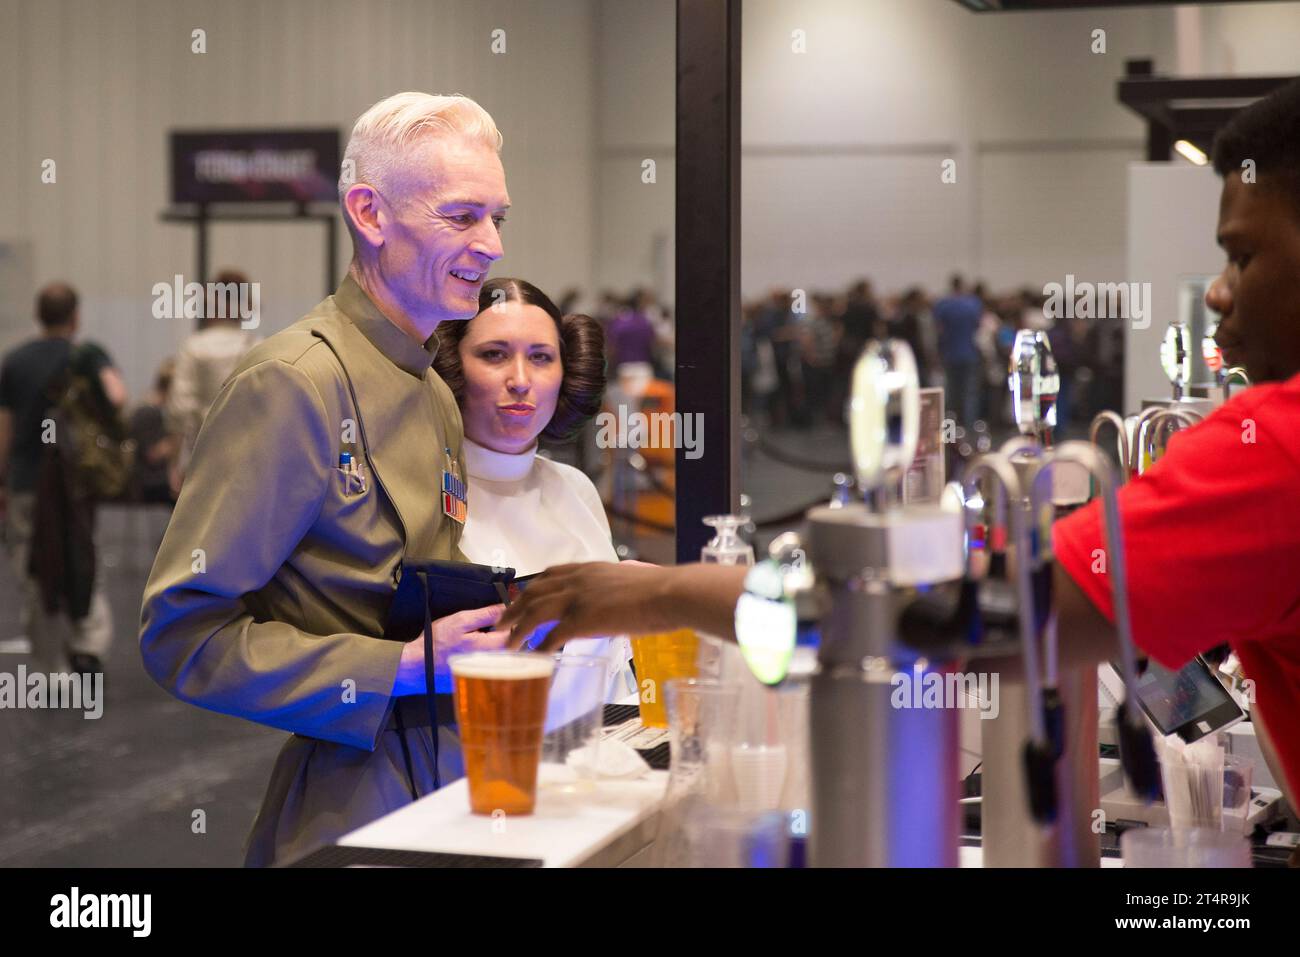 Imperial Officer and Princess Leia cosplay fans buying alcohol at a bar Stock Photo